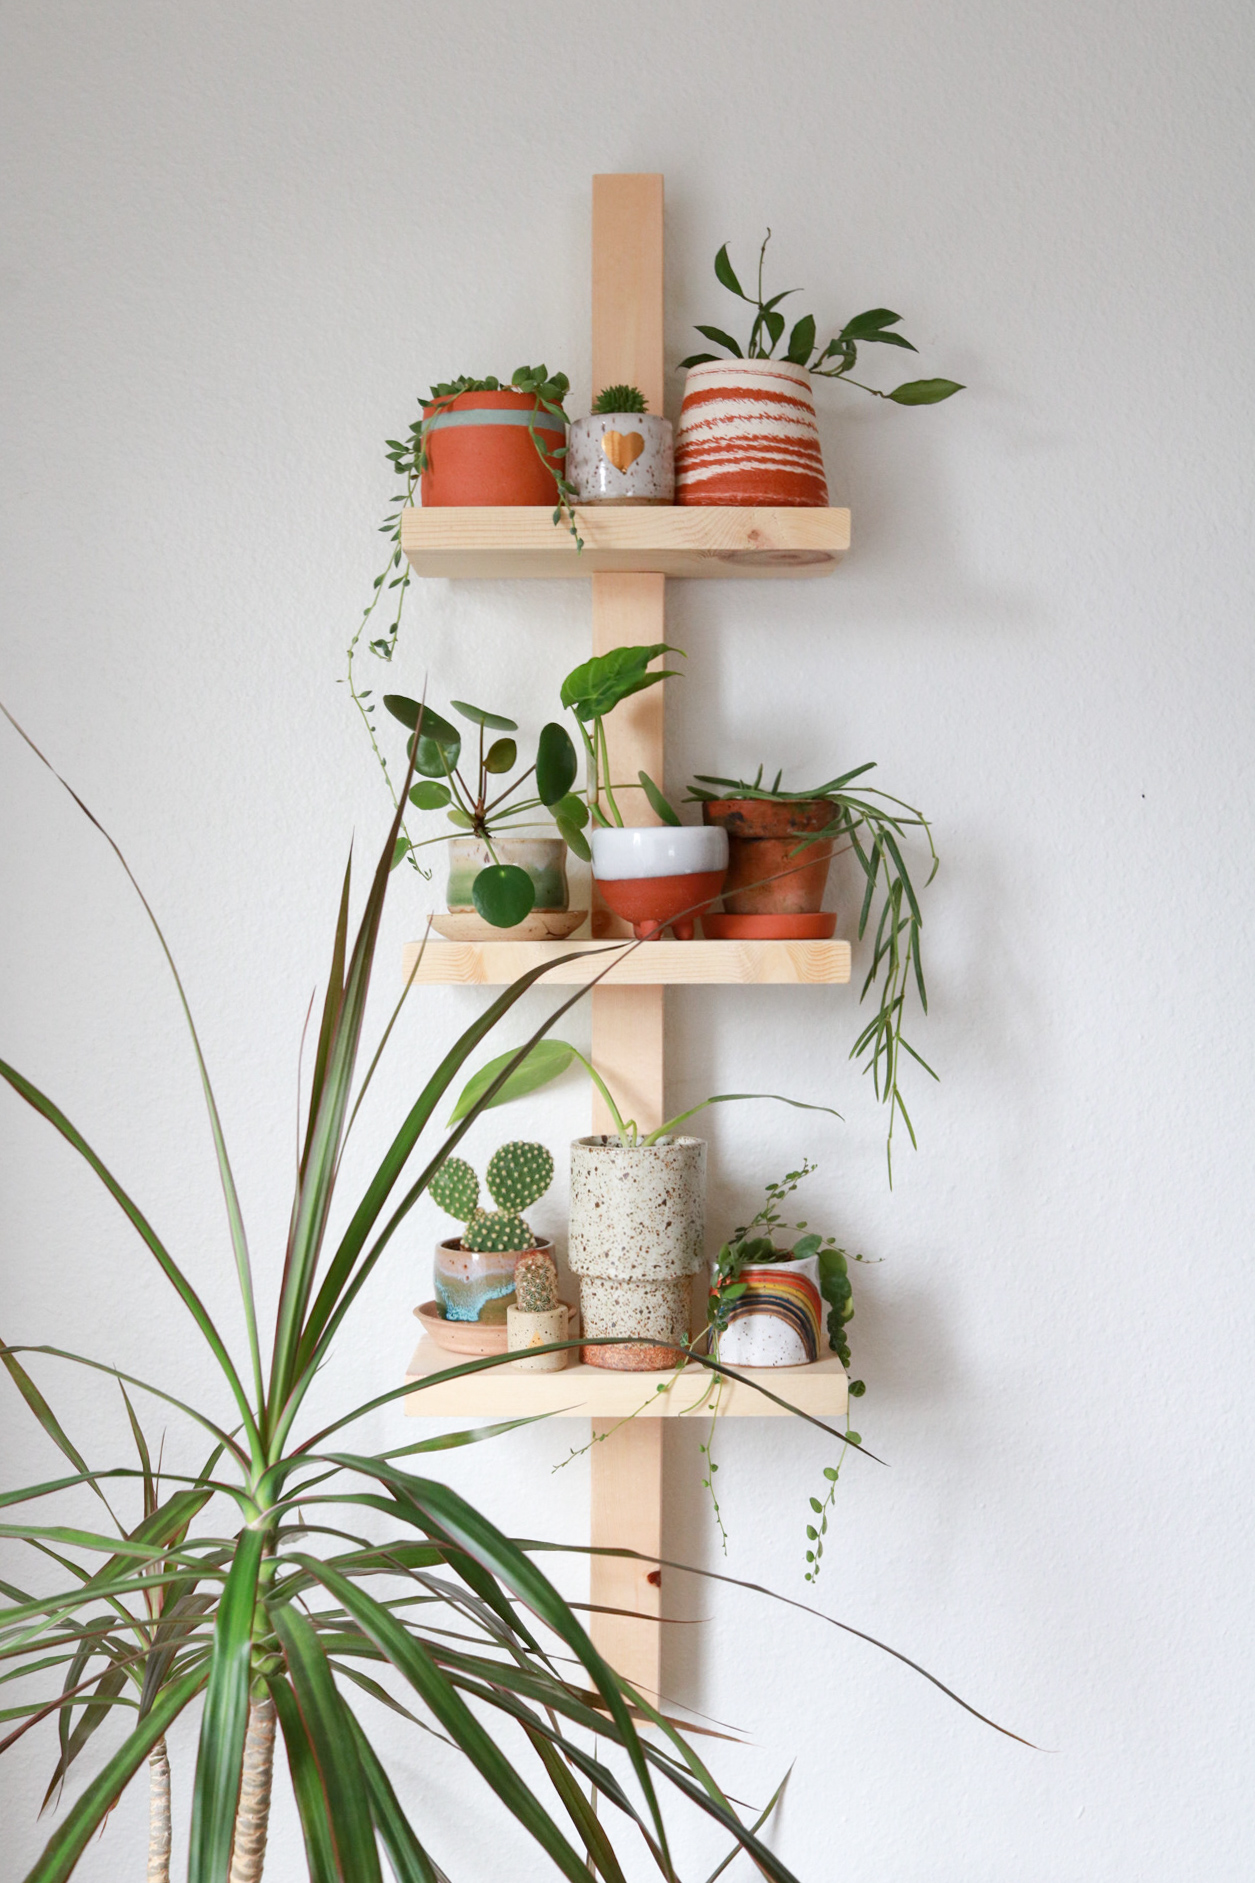 Have you been looking for a cute modern shelf to display your plant collection? Look no further! This modern plant shelf is pretty easy to make and it can be made for under $10. Display all of your favorite pots and knick knack with this easy DIY. #houseplants #displayshelf #diyshelf #modernorganization